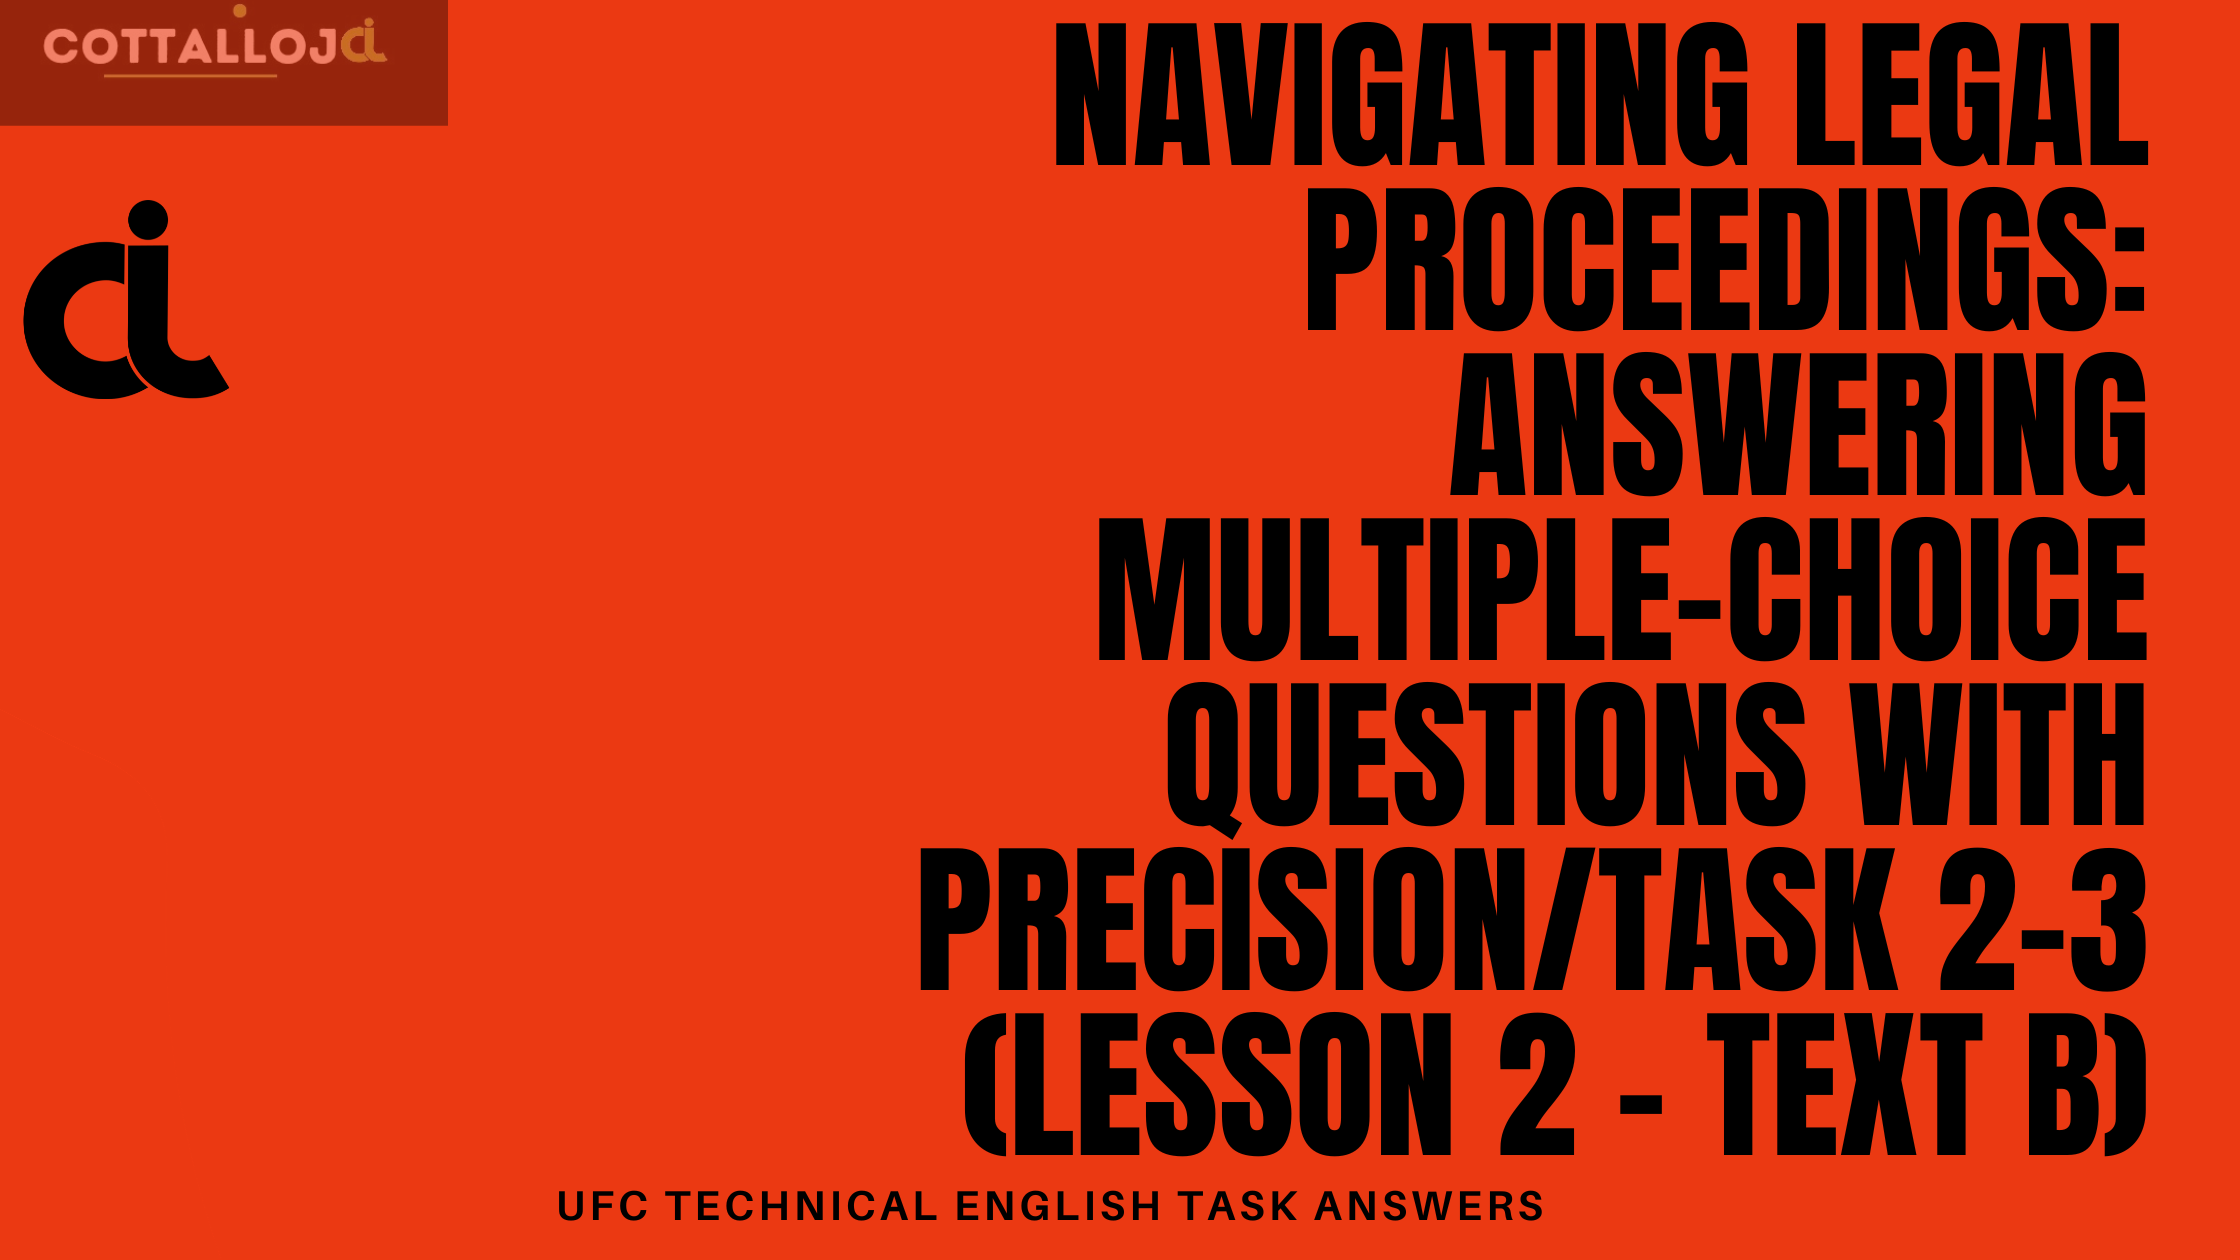 Navigating Legal Proceedings: Answering Multiple-Choice Questions with Precision/task 2-3 (Lesson 2 – Text B)